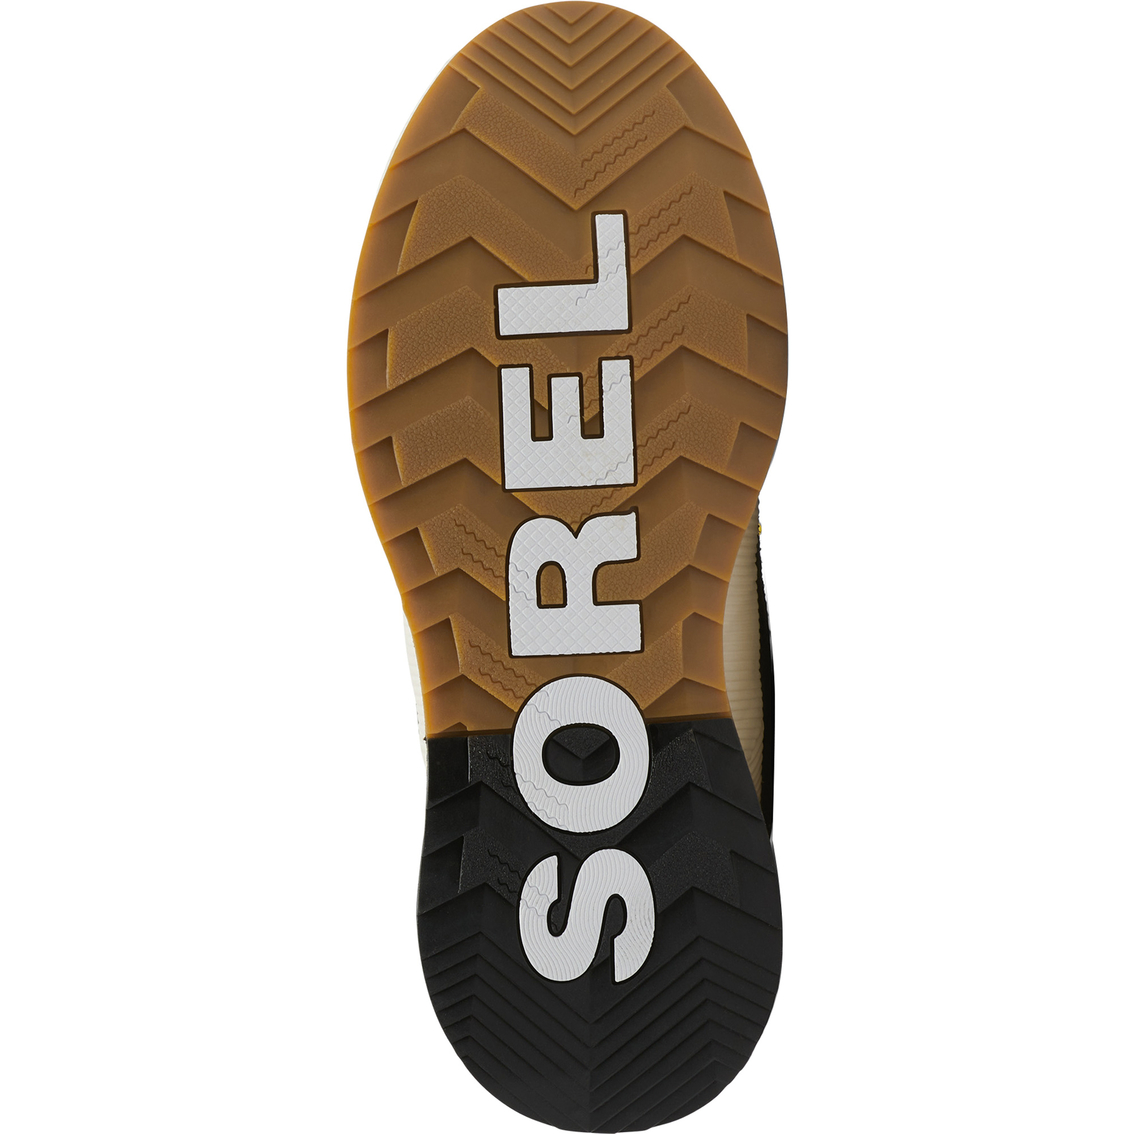 Sorel Out ’N About III Low Sneakers - Image 5 of 8